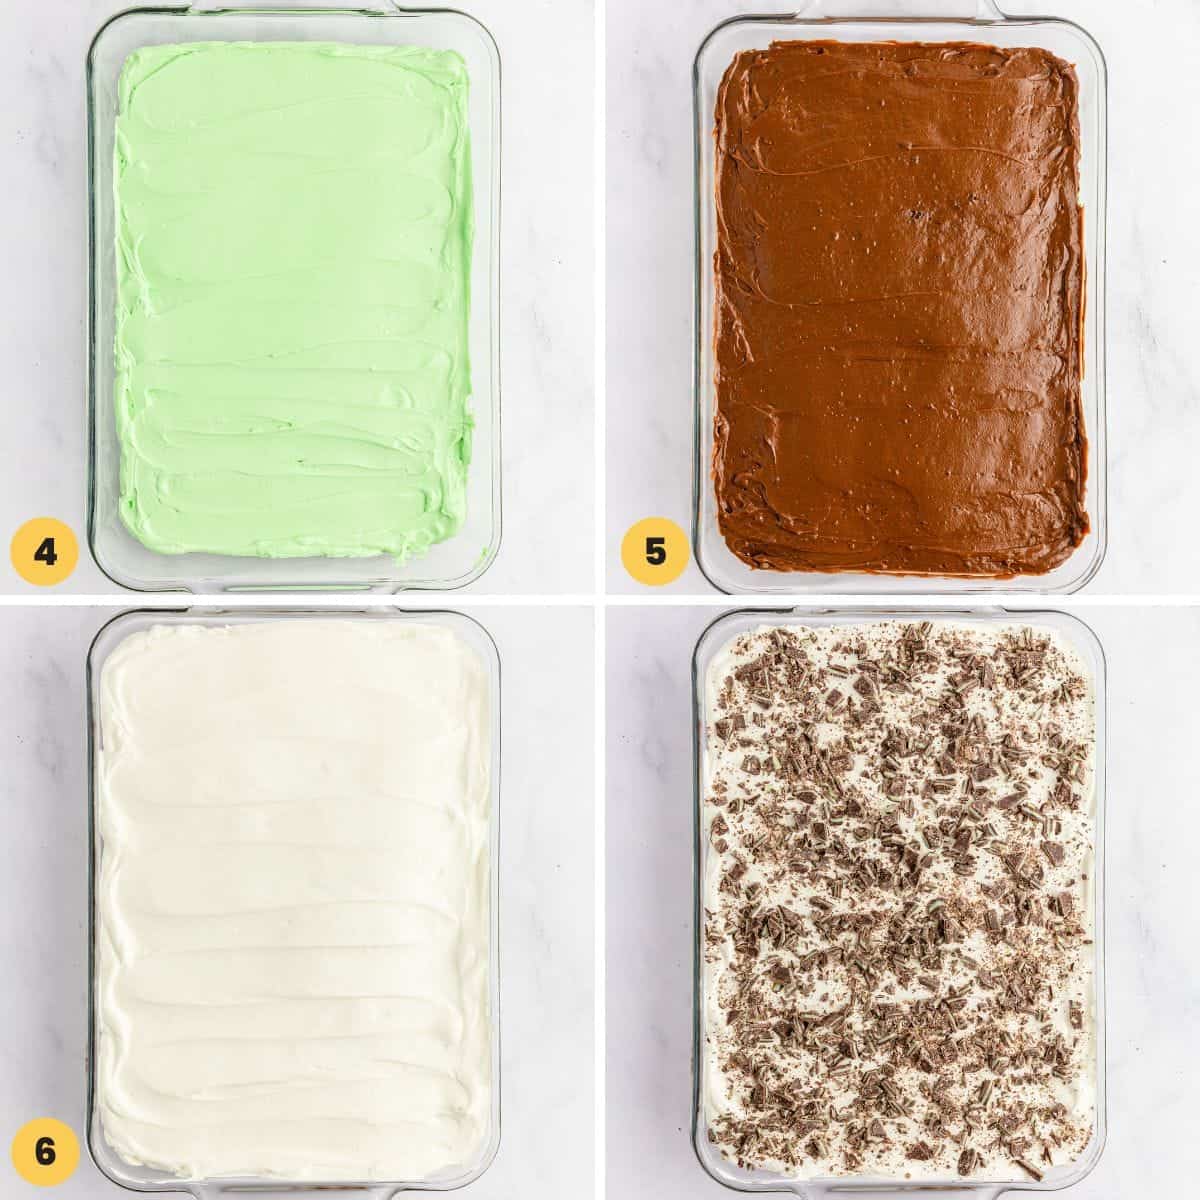 a collage of four images to show the order of the layers in minty chocolate lasagna